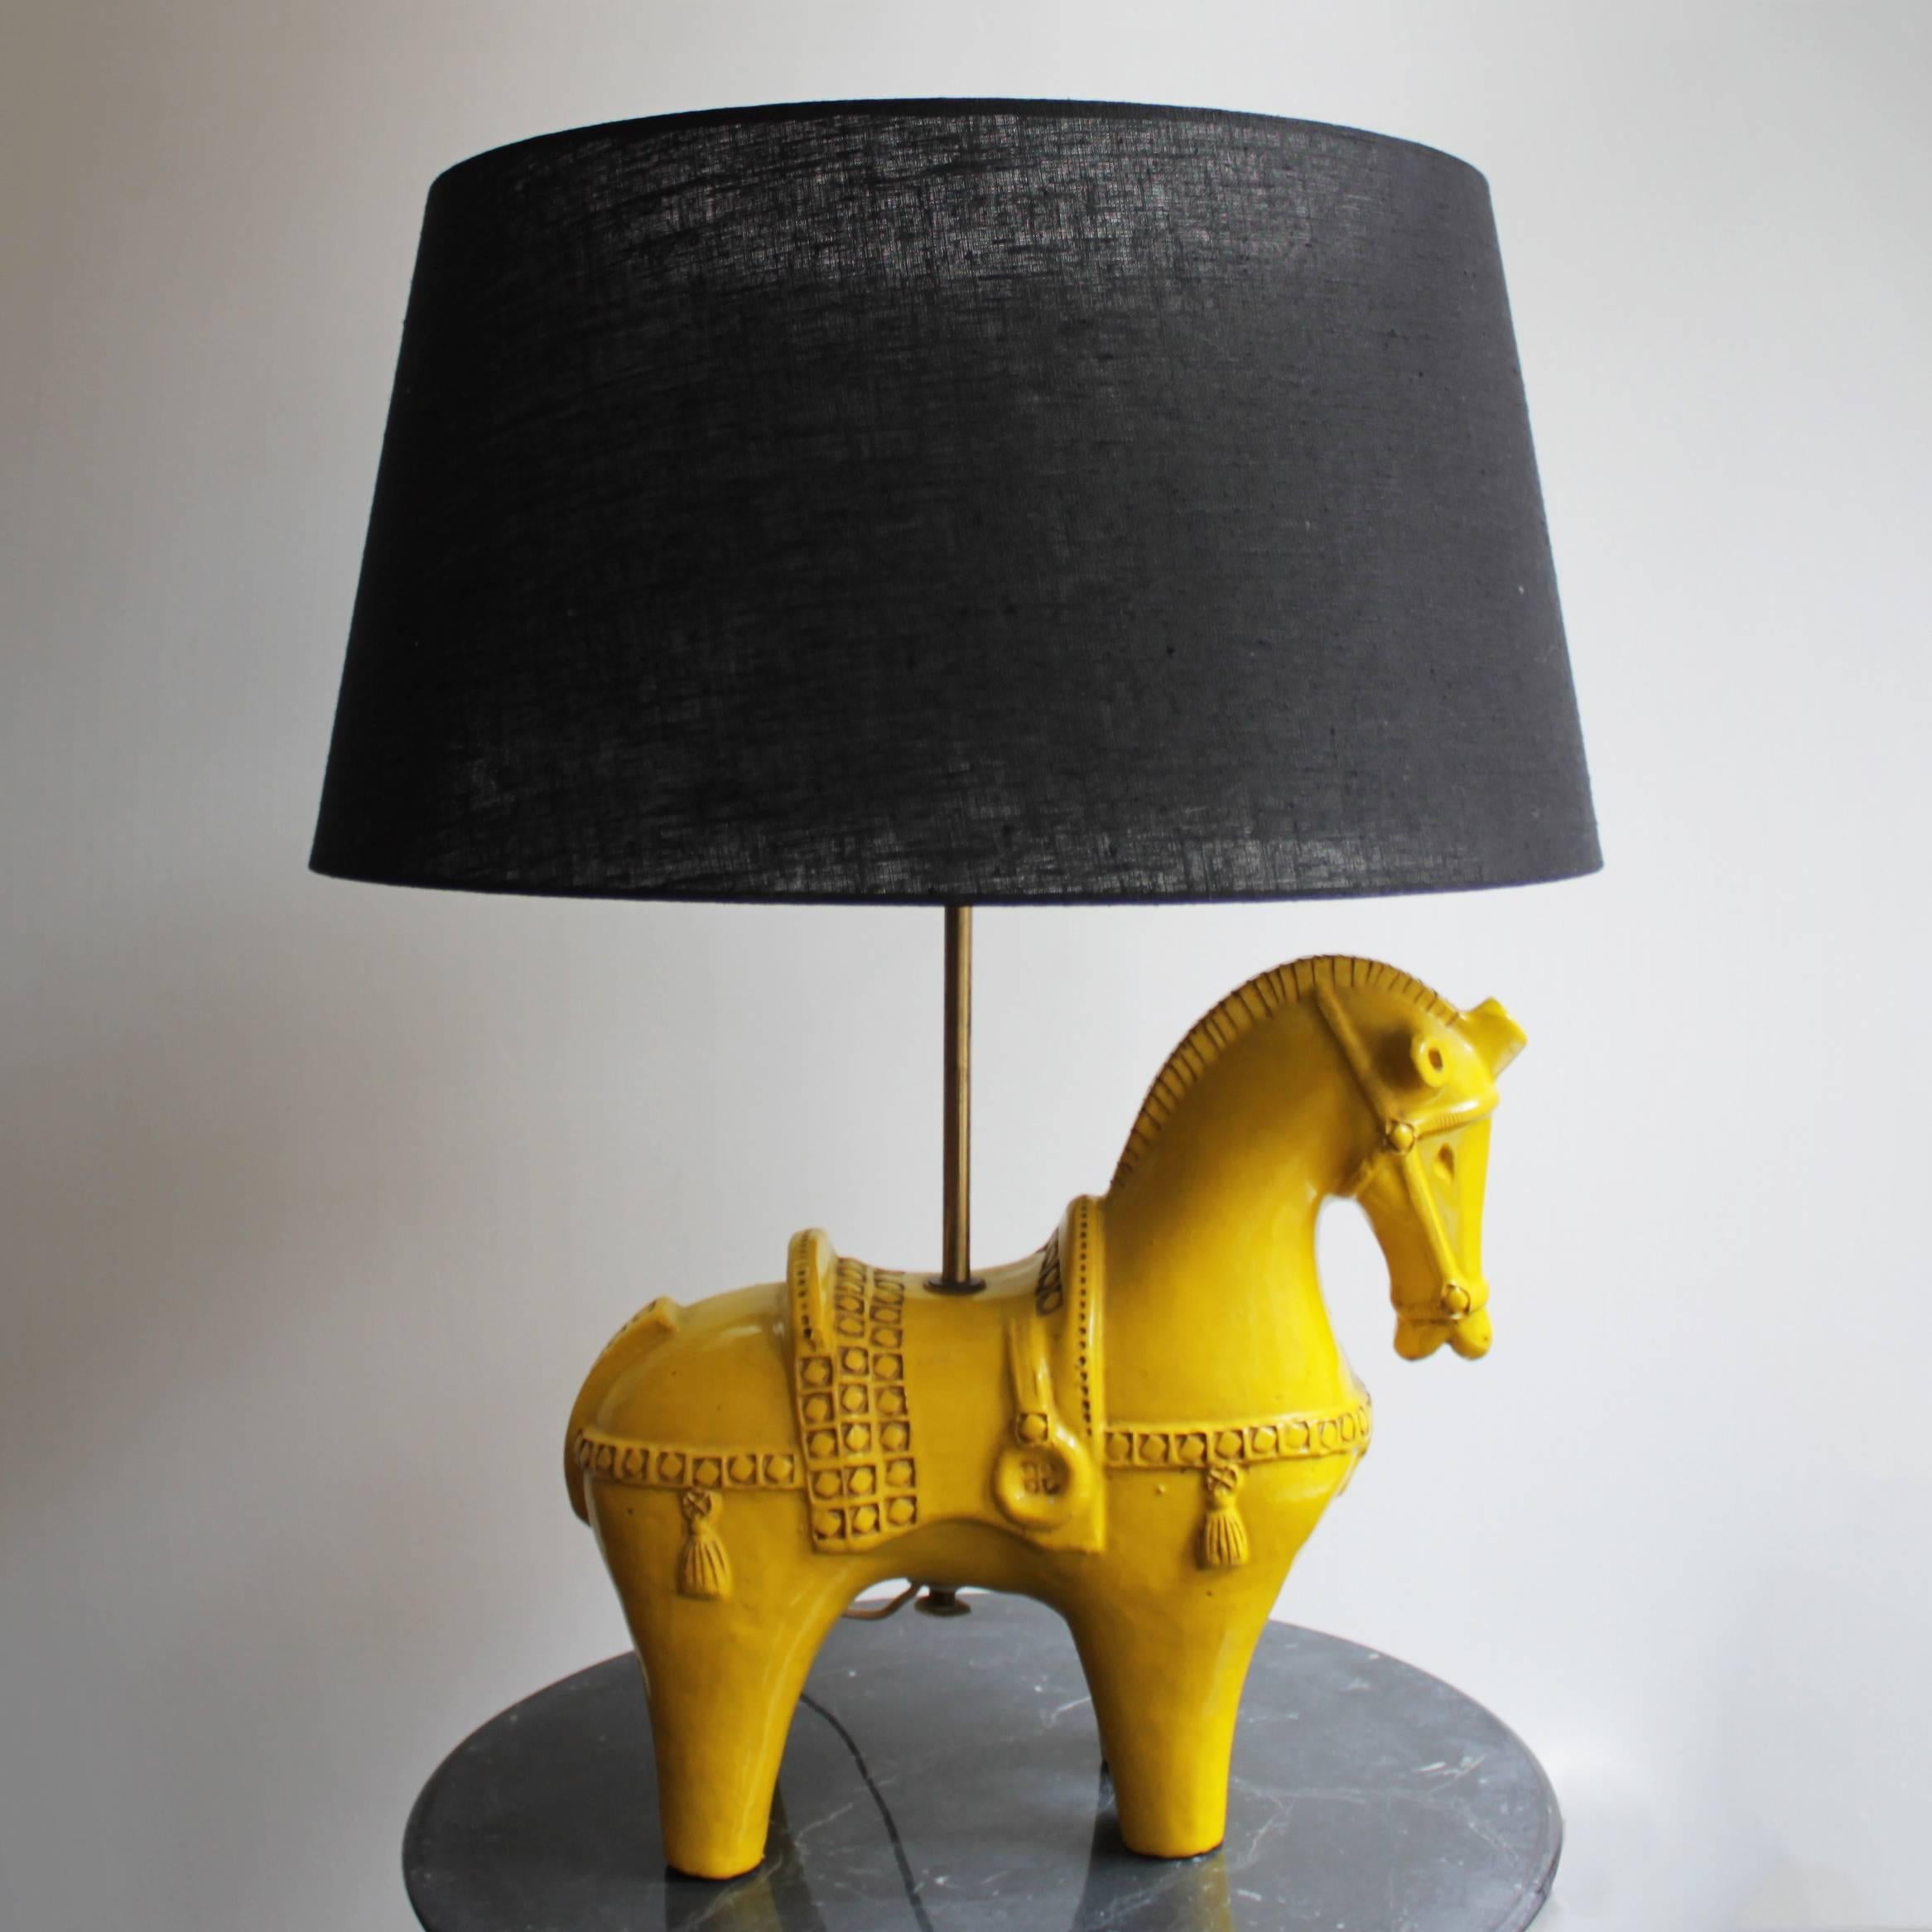 Rare yellow ceramic horse table lamp by Aldo Londi for Guido Bitossi Studio's Montelupo, Italy. Dimensions: diameter shade 21.2 in. (54 cm), total height with the horse 27.1 in. (69 cm). Dimensions of the horse: Width 7.8 in. (20 cm) length 16.9 in.